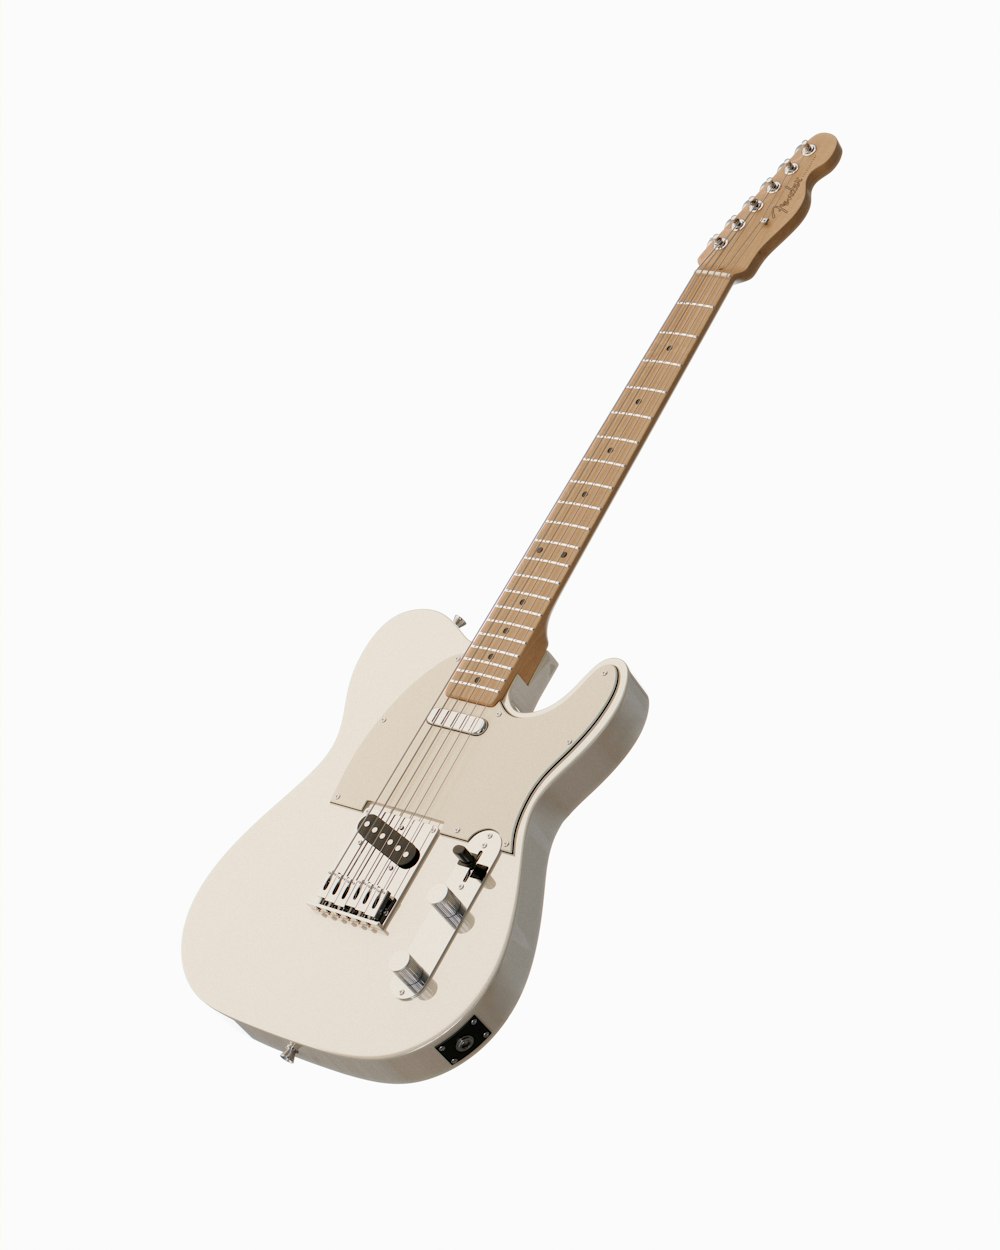 a white electric guitar with a wooden neck